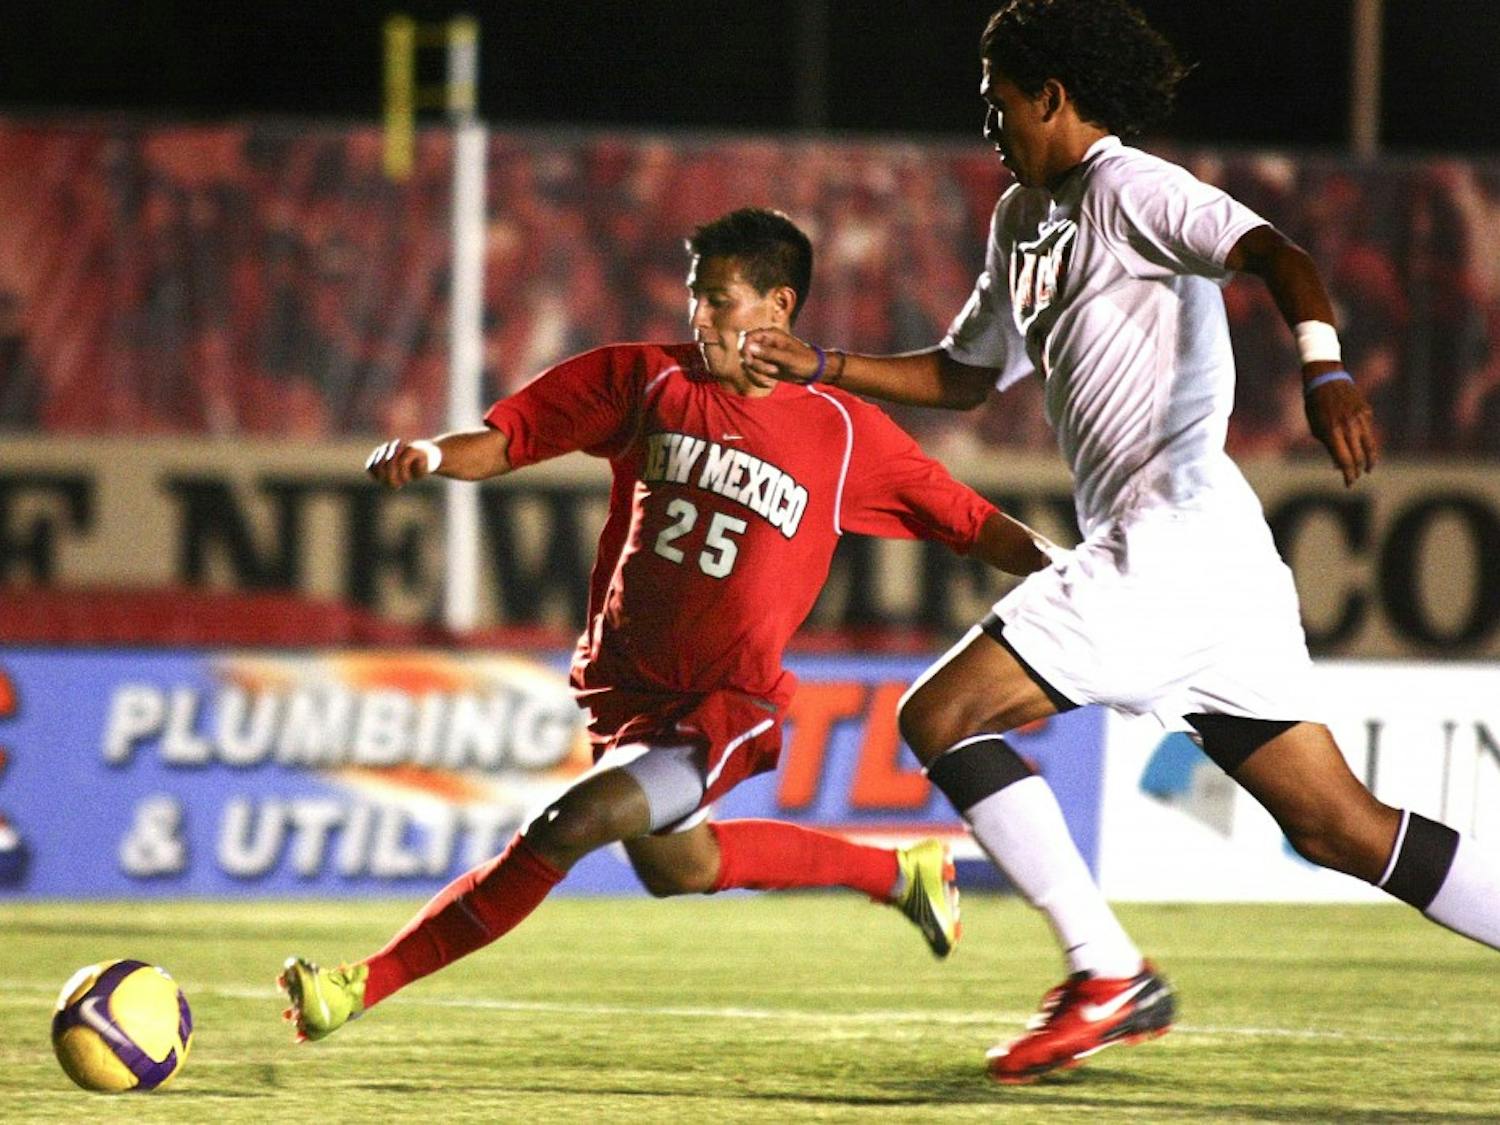 	UNM’s Patrick Pacheco prepares to launch a shot on goal Friday night at the UNM Soccer Complex. Pacheco scored the first goal of the game in UNM’s 2-1 conference opener win against UNLV.